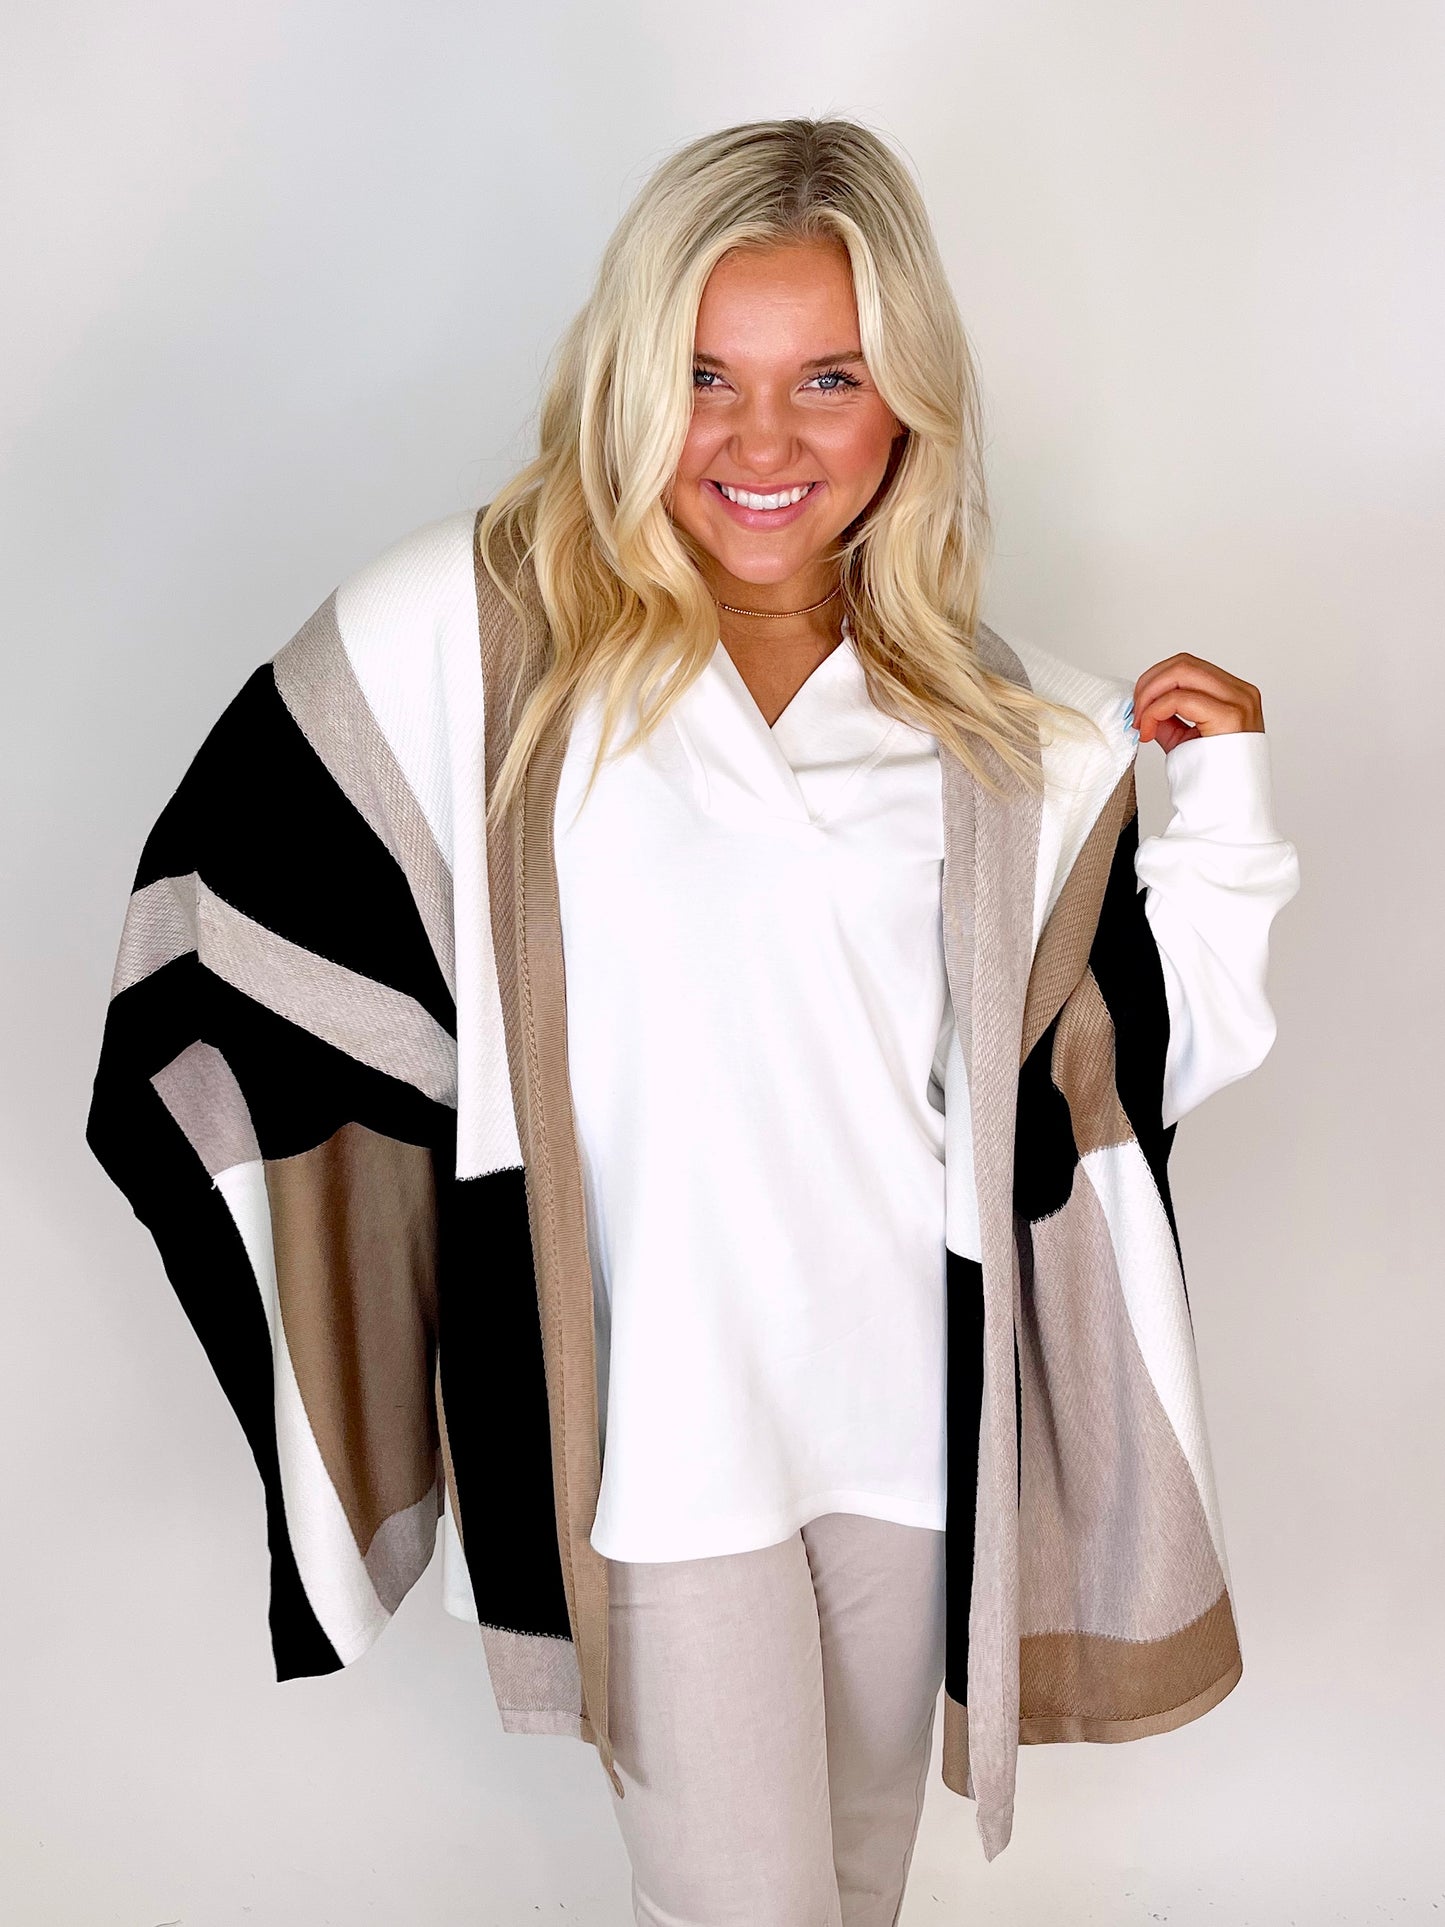 Poncho Cape Sweater | Tribal-Poncho-Tribal-The Village Shoppe, Women’s Fashion Boutique, Shop Online and In Store - Located in Muscle Shoals, AL.